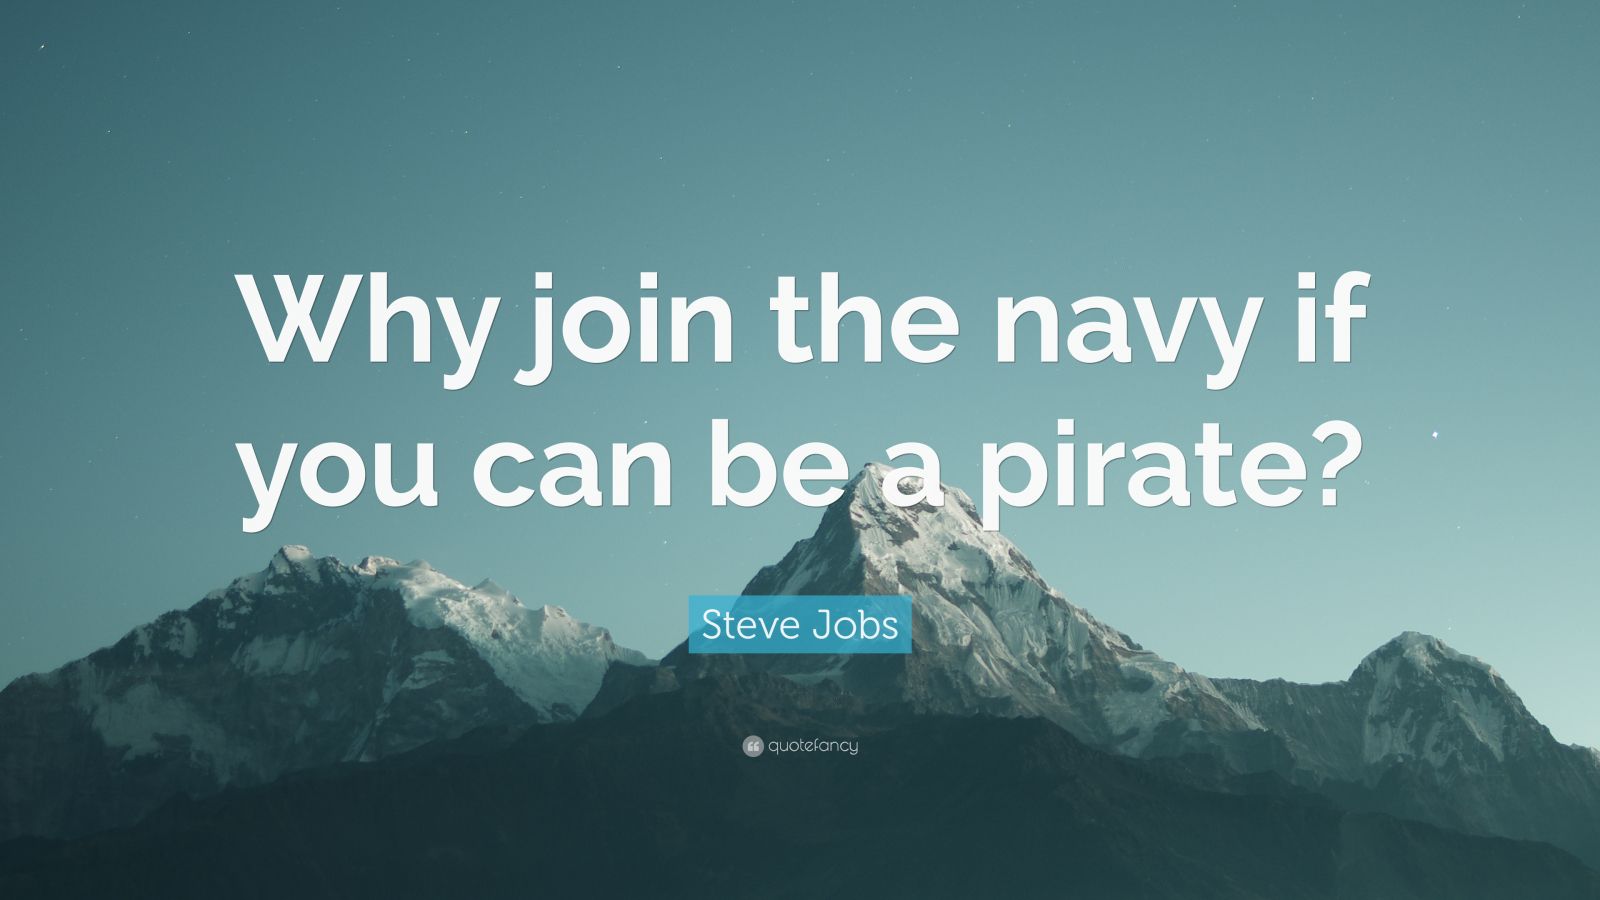 Steve Jobs Quote: “Why join the navy if you can be a pirate?” (21